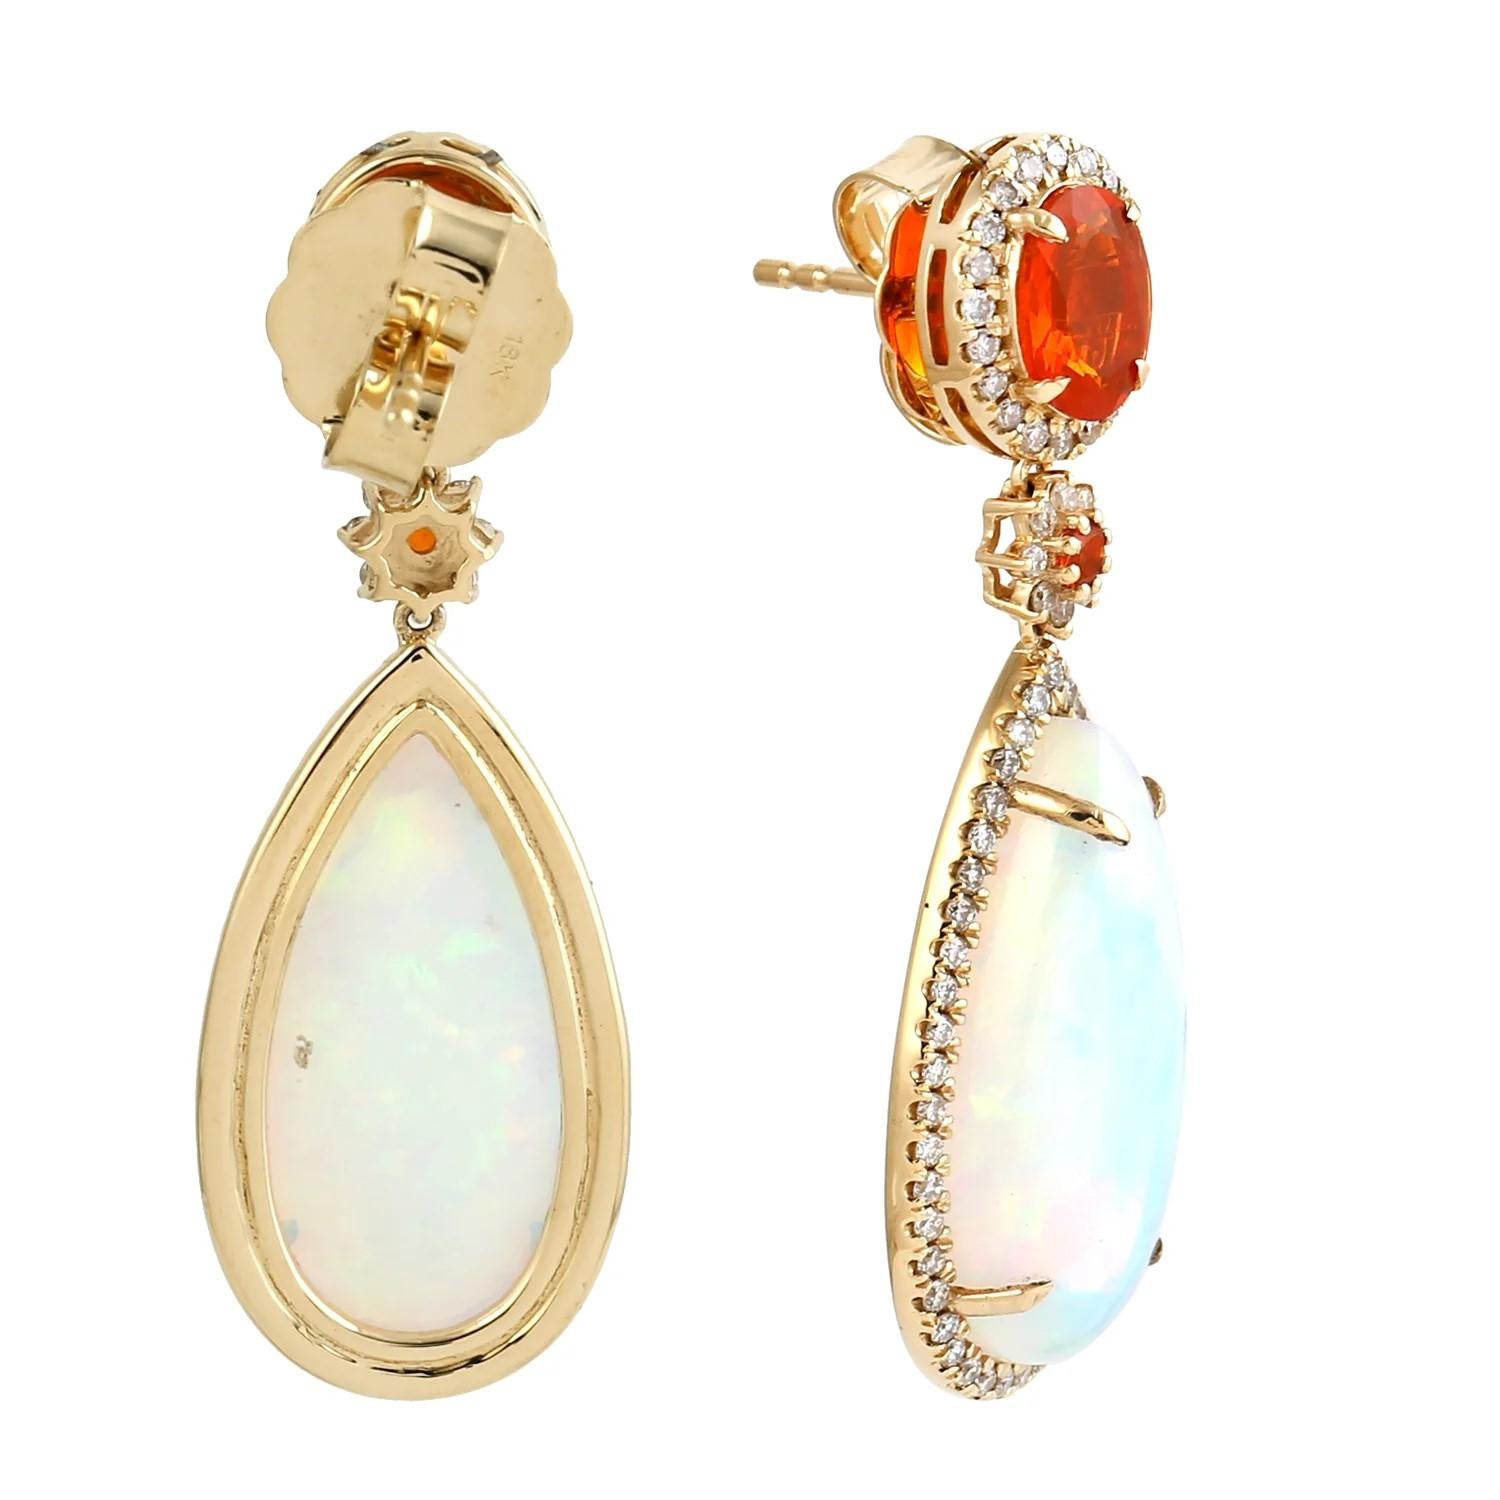 Cast in 18 karat gold. These stud earrings are hand set in 11.76 carats Ethiopian opal, 1.1 carats fire opal and .89 carats of sparkling diamonds. 

FOLLOW MEGHNA JEWELS storefront to view the latest collection & exclusive pieces. Meghna Jewels is